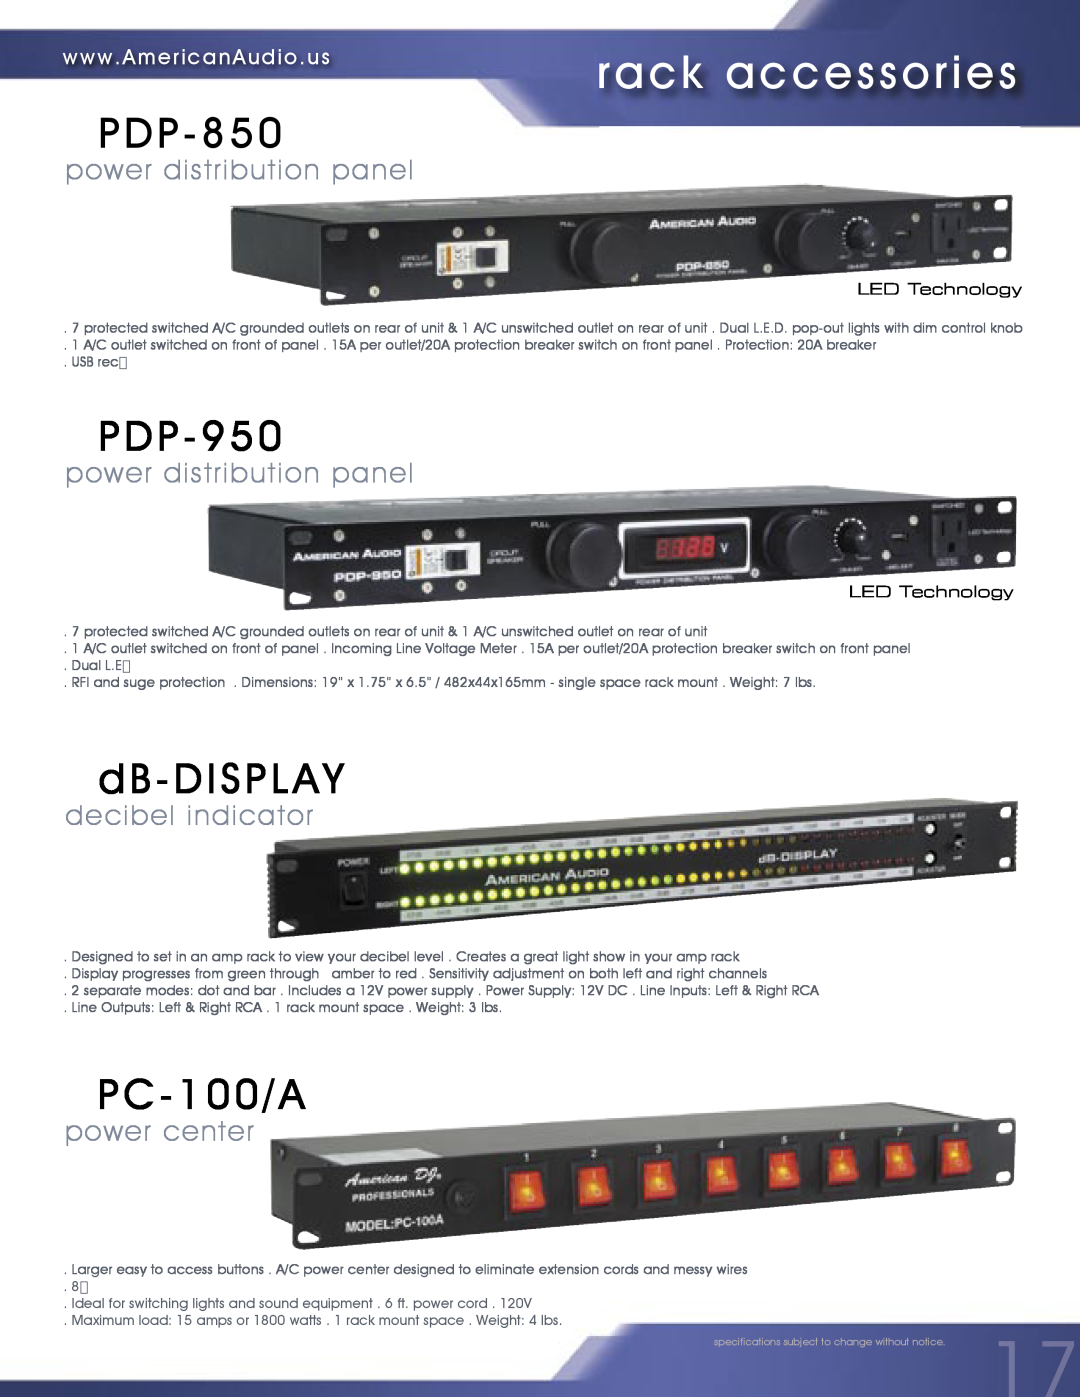 American Audio MCD-810 rack accessories, PDP-850, PDP-950, dB-DISPLAY, PC-100/A, power distribution panel, power center 